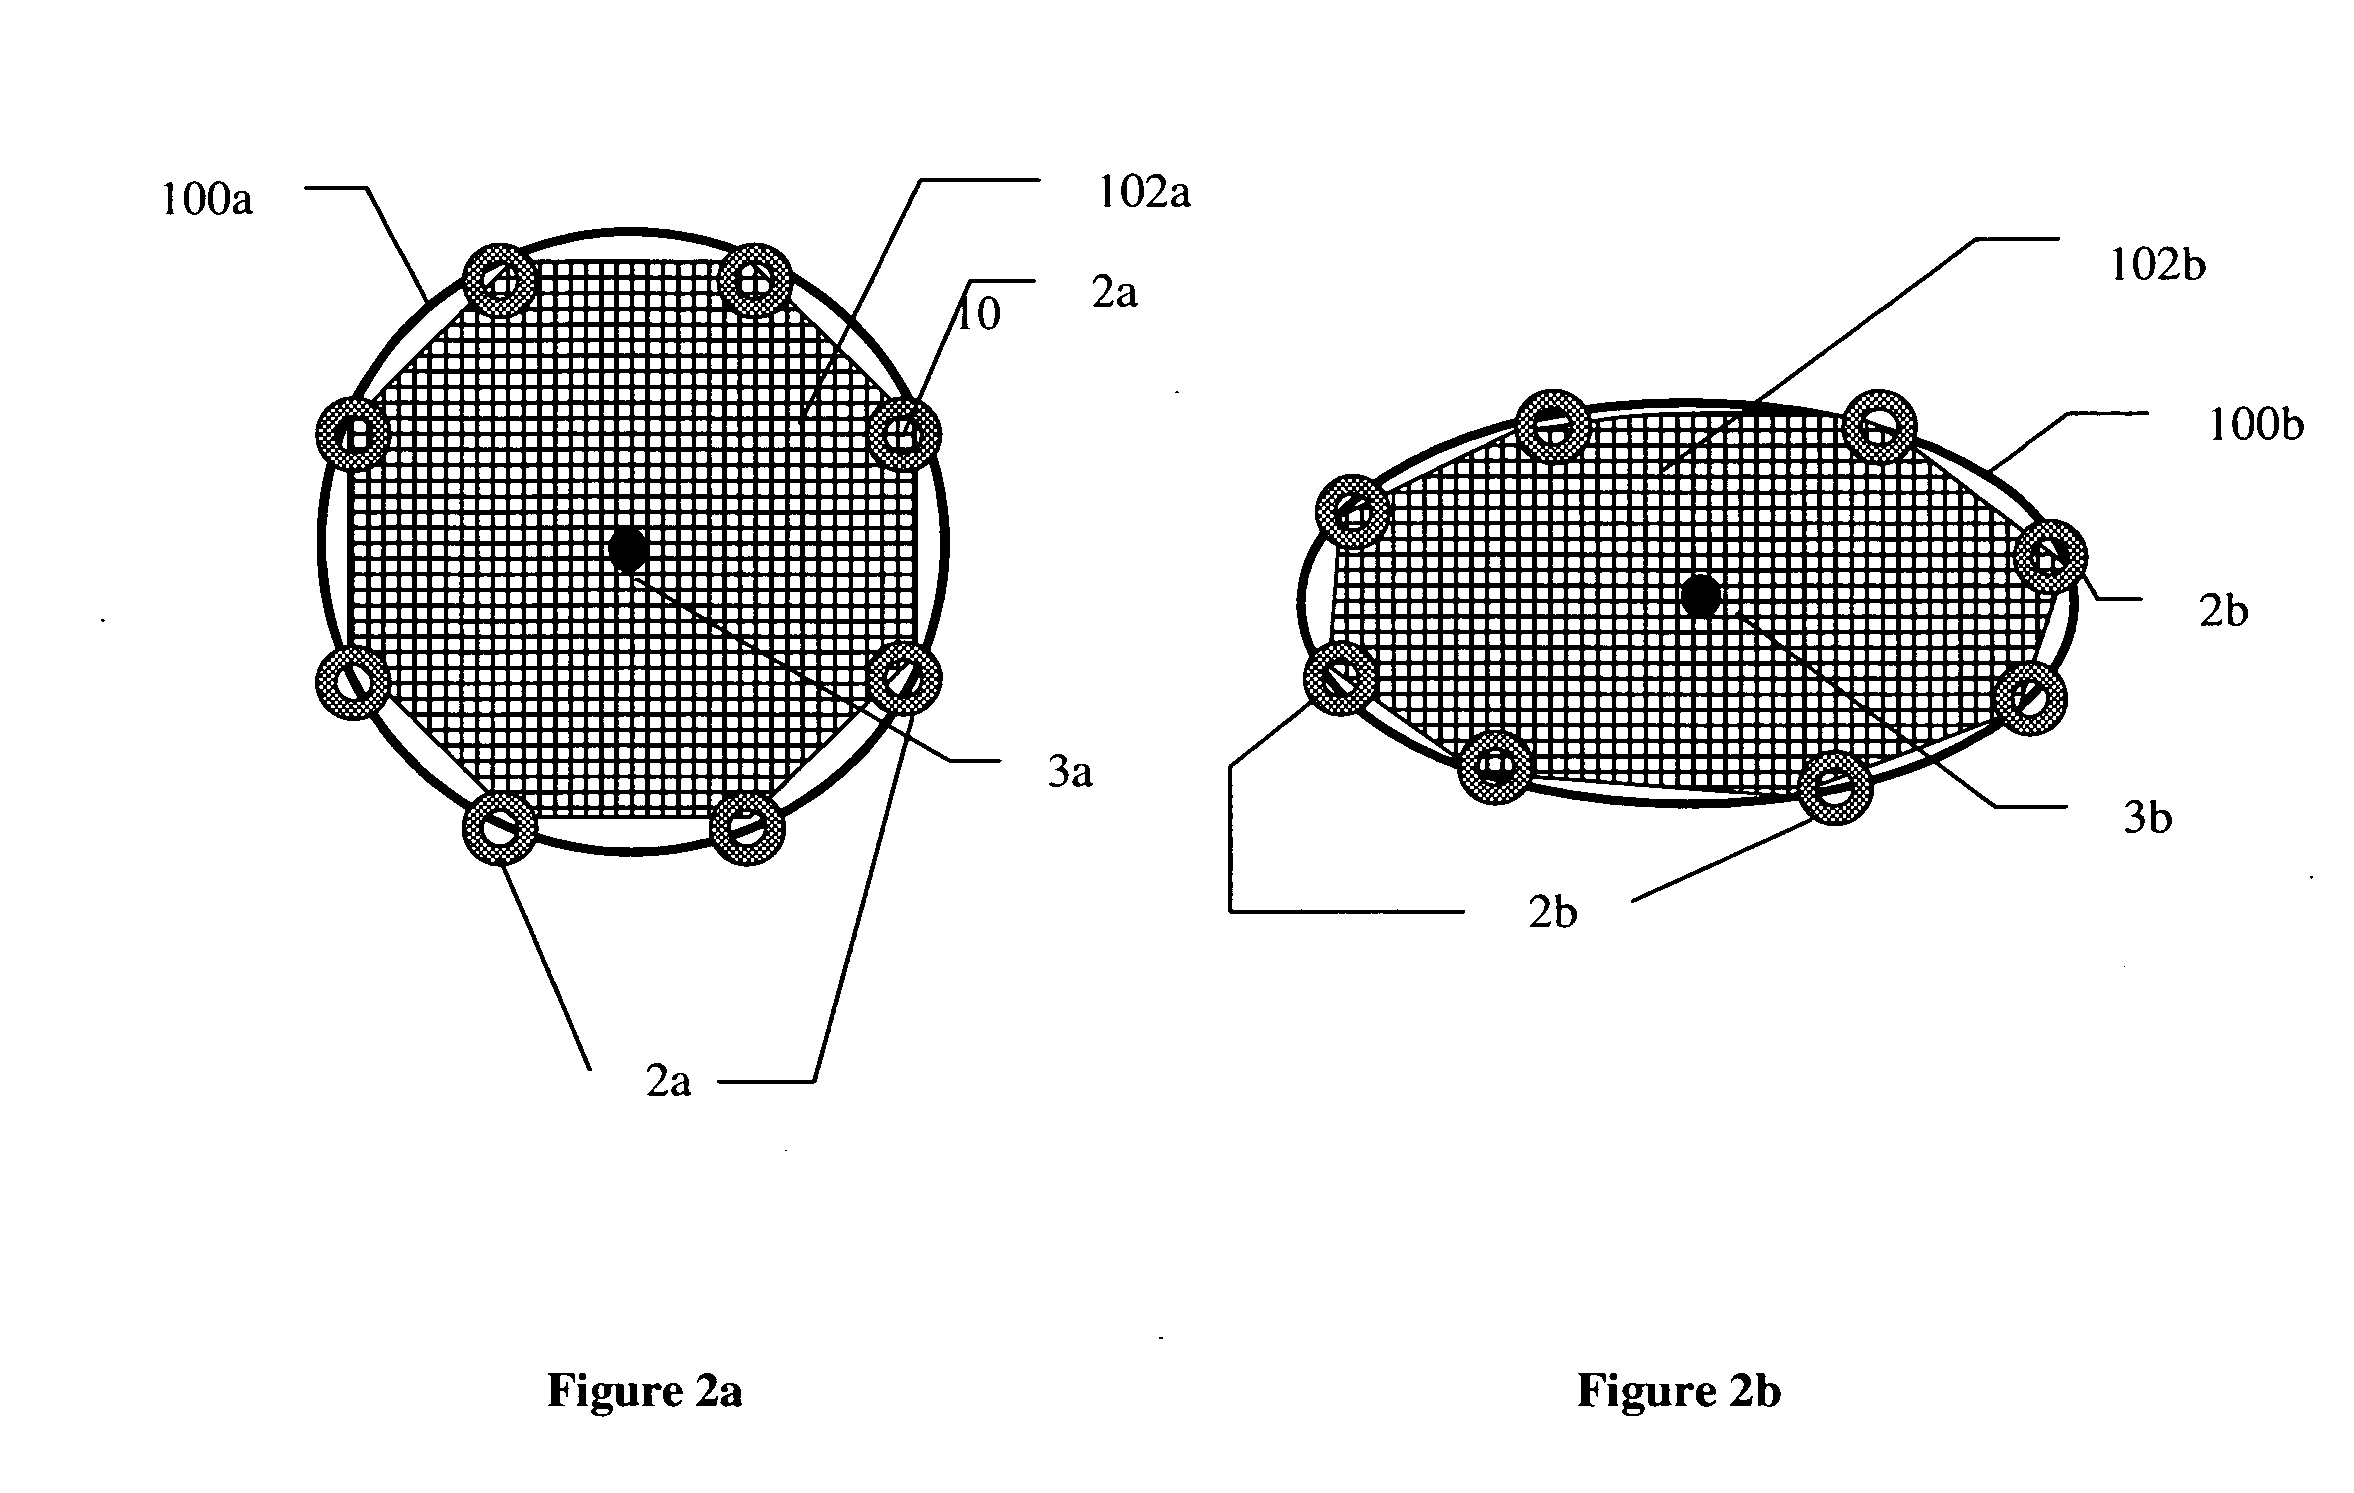 Distal protection filter with improved wall apposition